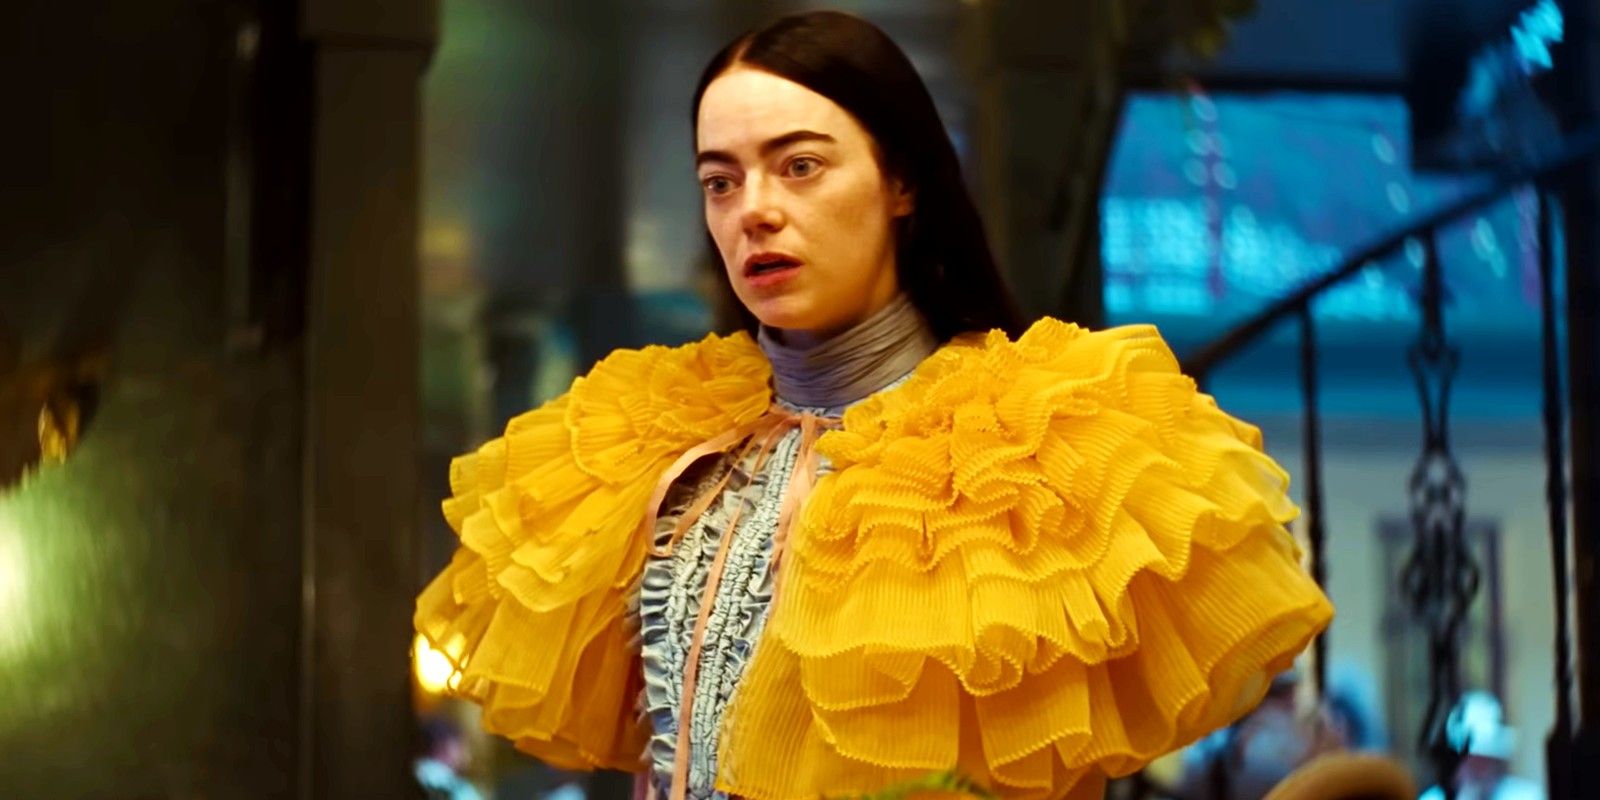 Emma Stone as Bella standing up in Poor Things